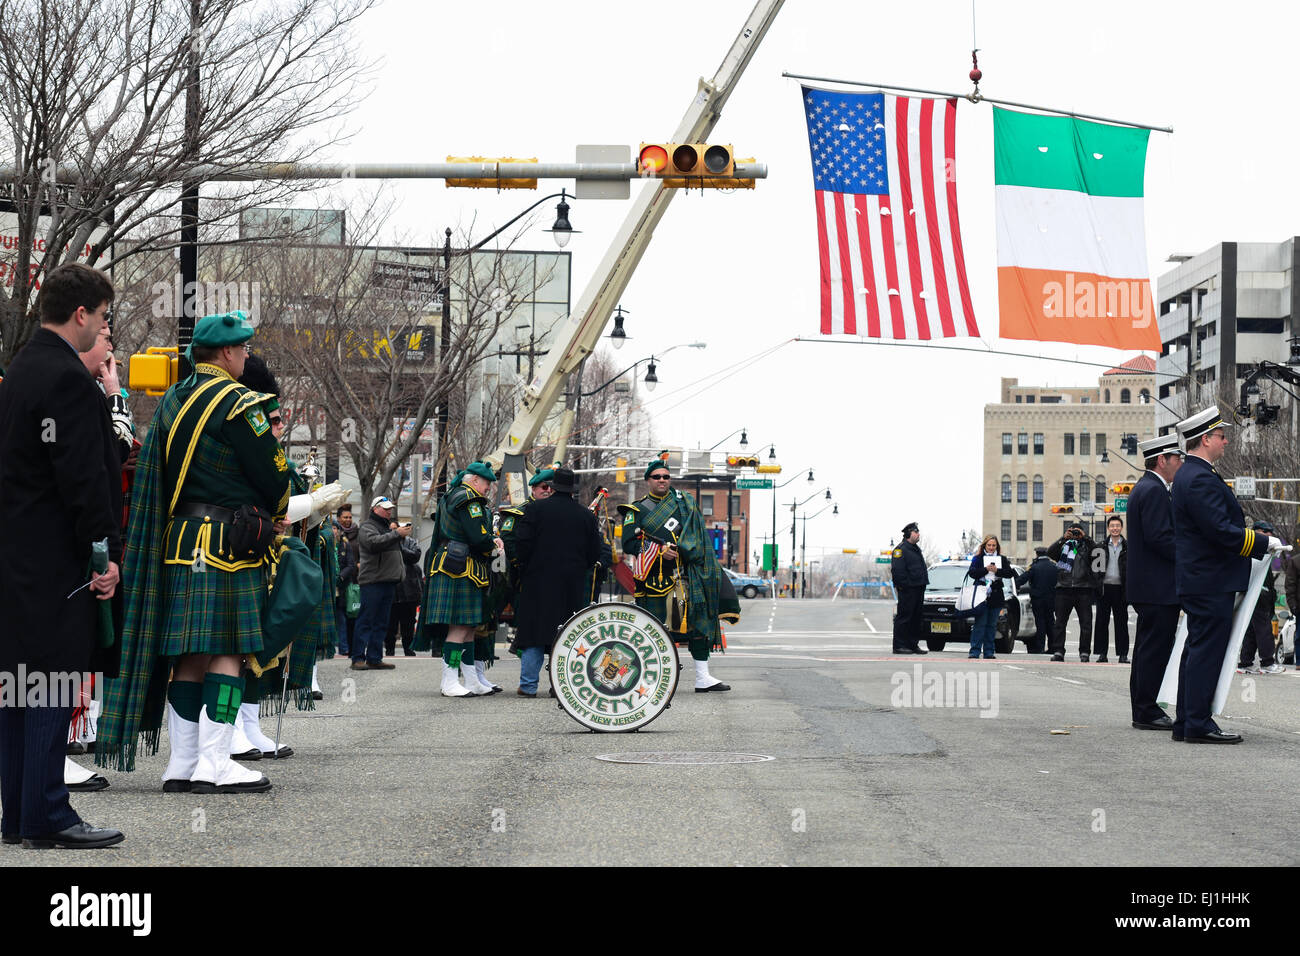 Emerald Society of police and fire - pipes and drums - awaiting for the start of the 2013 St. Patricks day parade. Newark, NJ. Stock Photo